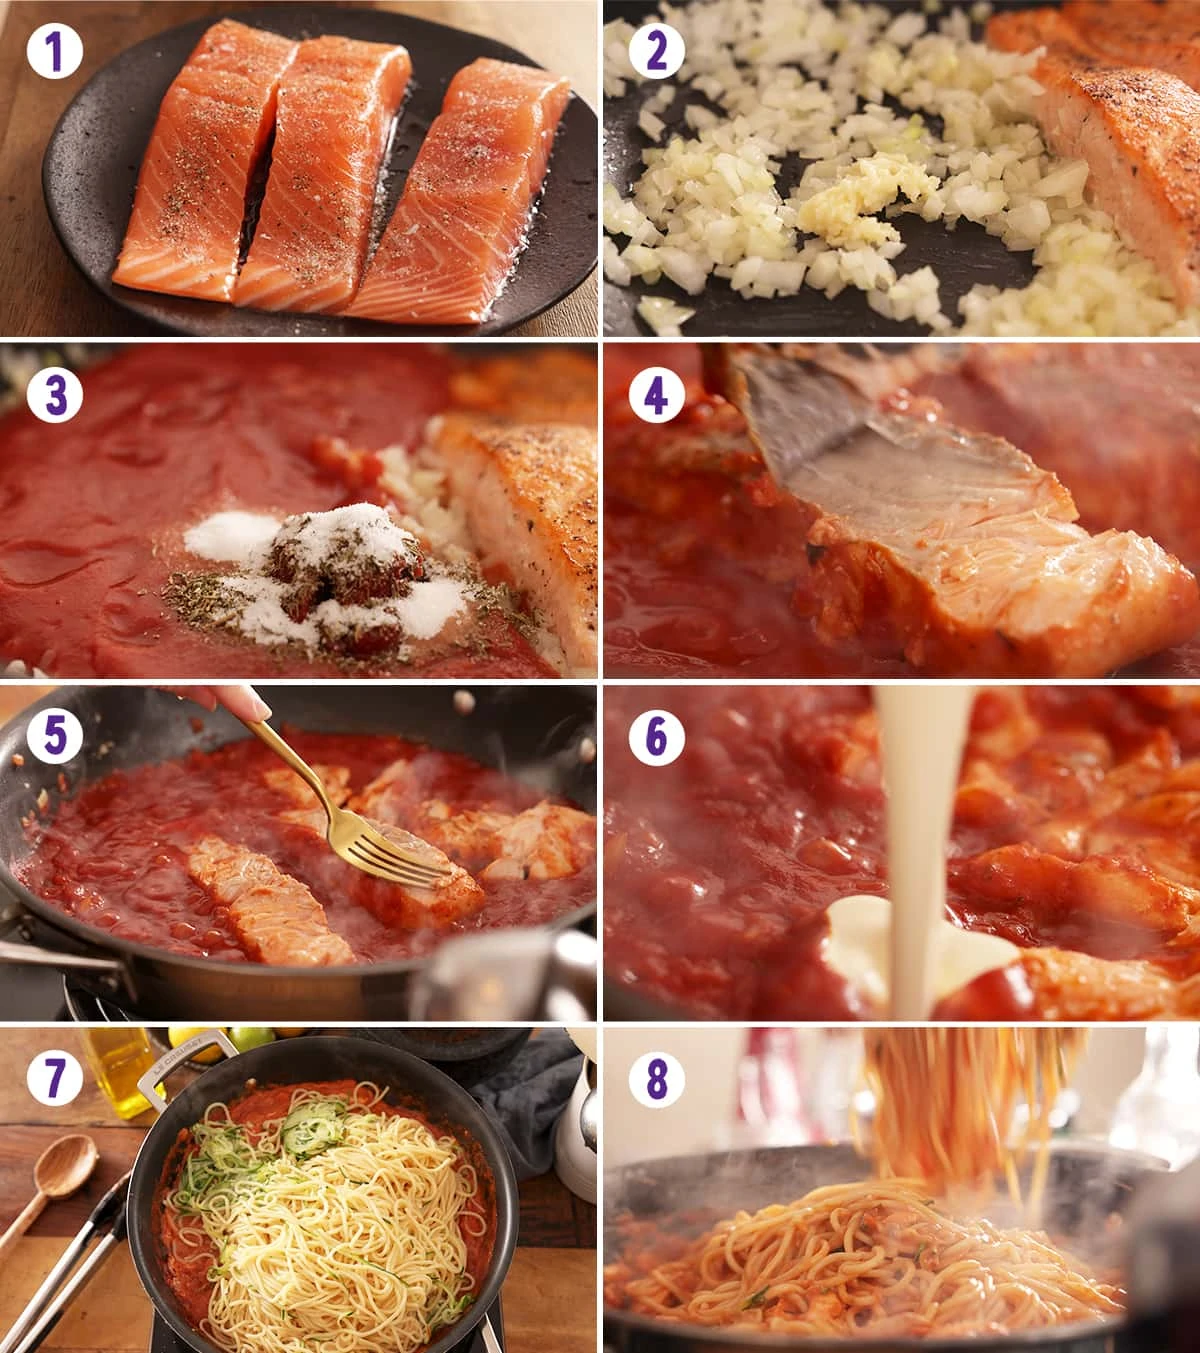 8 image collage showing how to make creamy tomato salmon and pasta.